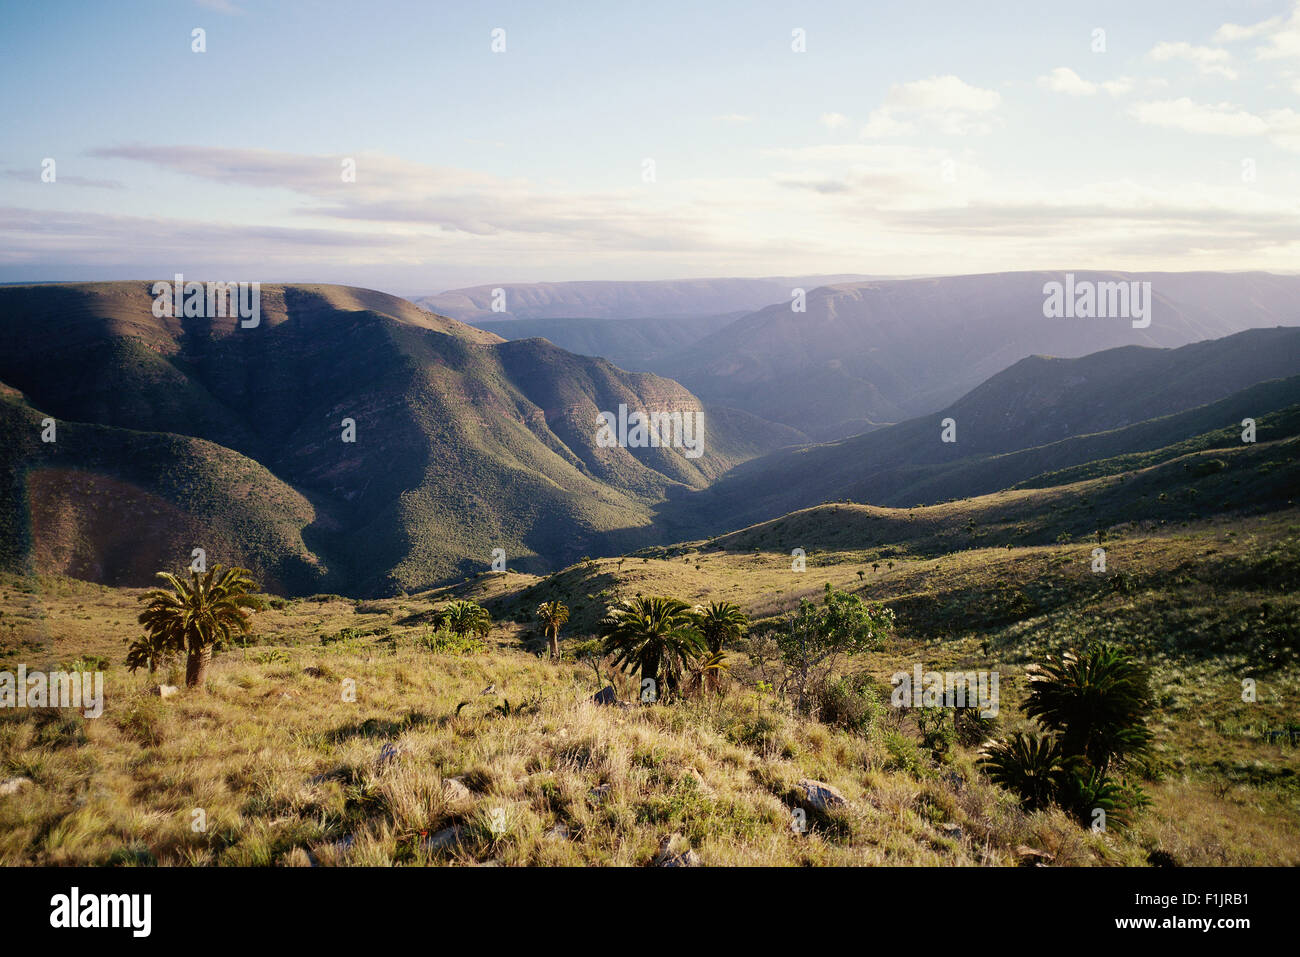 Landscape With Cycads Addo Elephant National Park Eastern Cape, South Africa Stock Photo